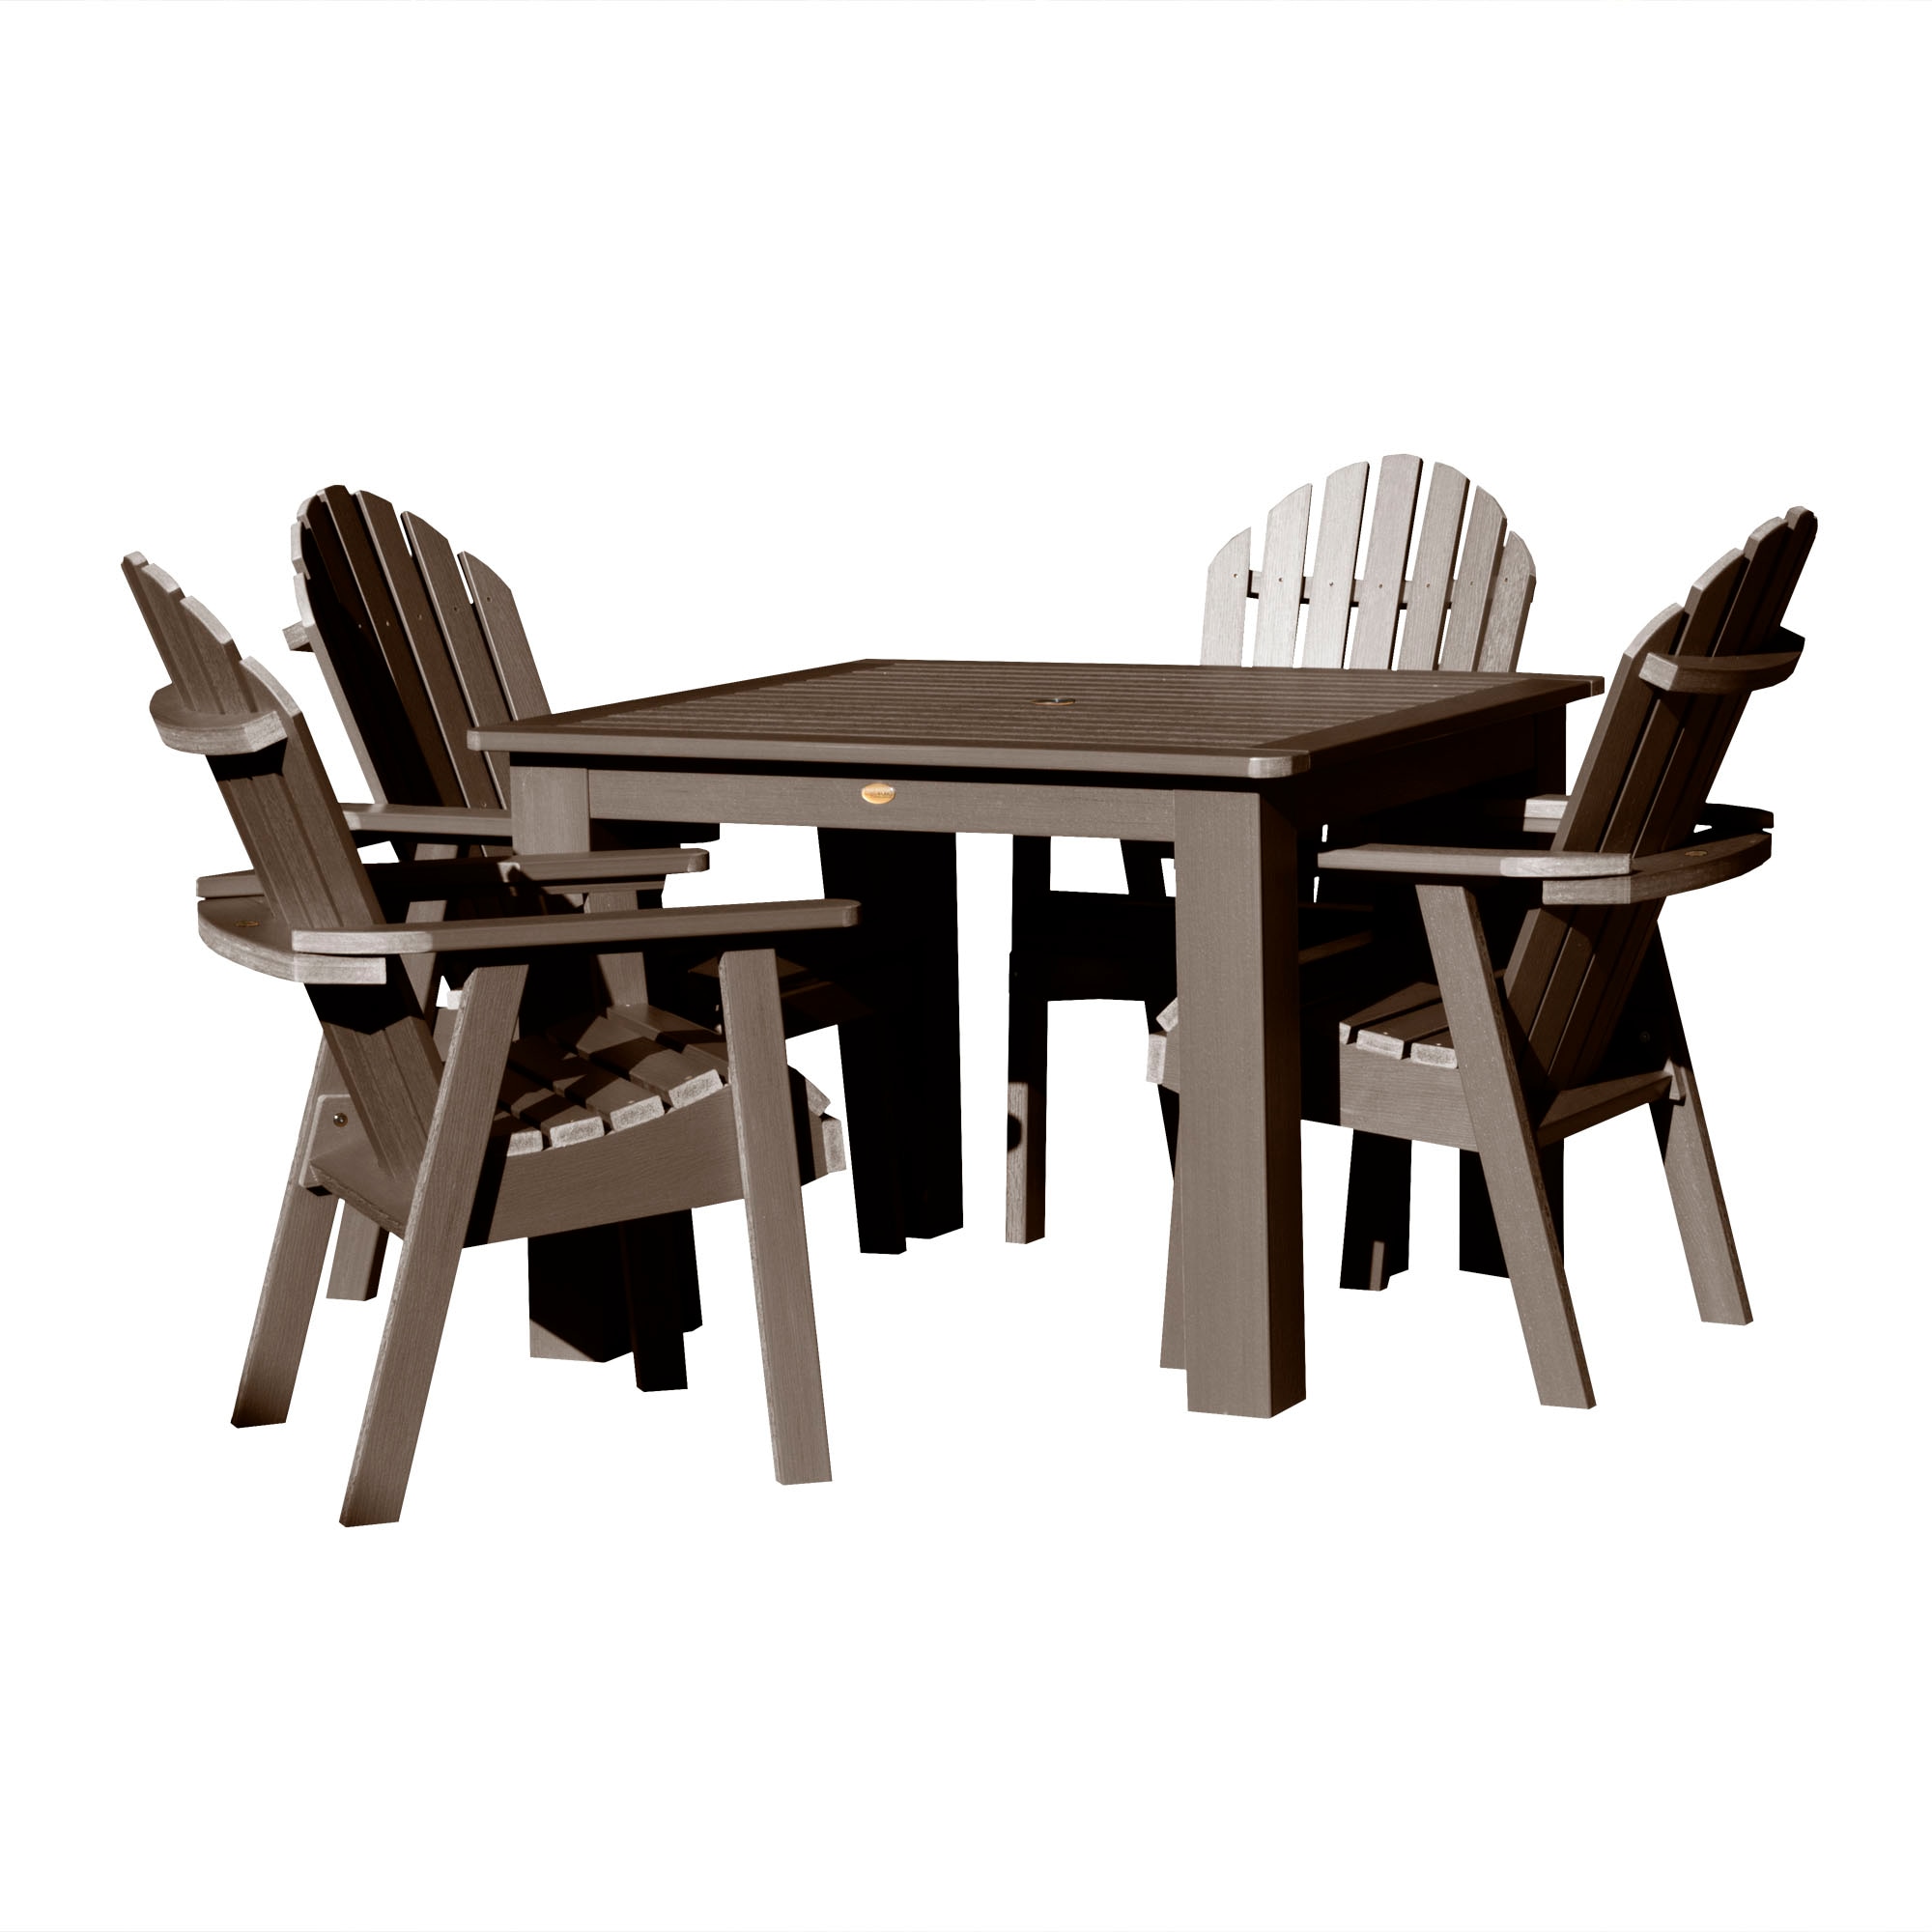 Highwood The Adirondack 5 Piece Brown Patio Dining Set In The Patio